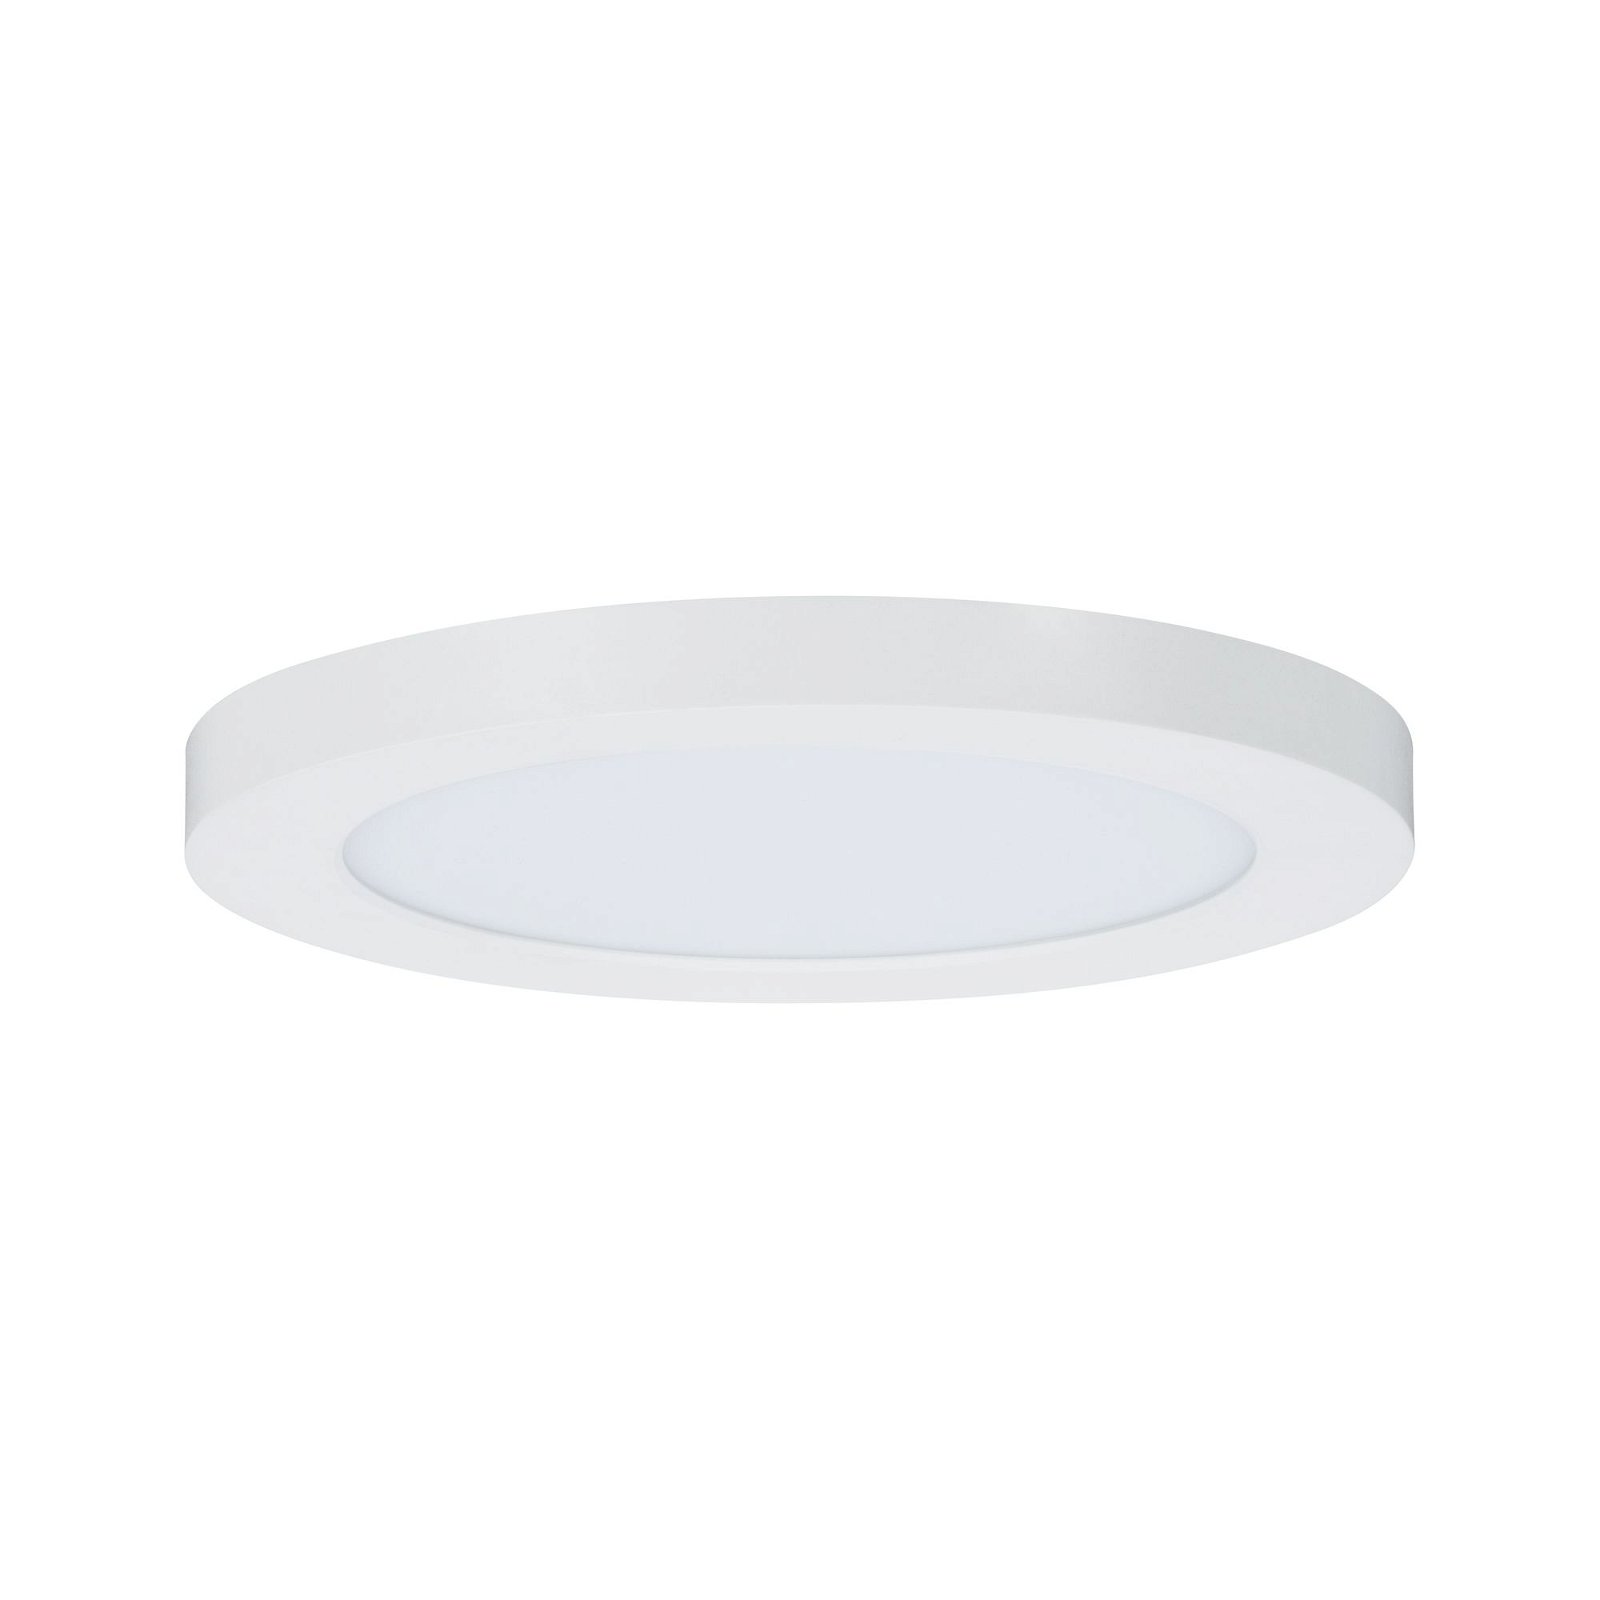 LED-inbouwpaneel Cover-it Promo rond 165mm 12W 1120lm 3000K Wit mat